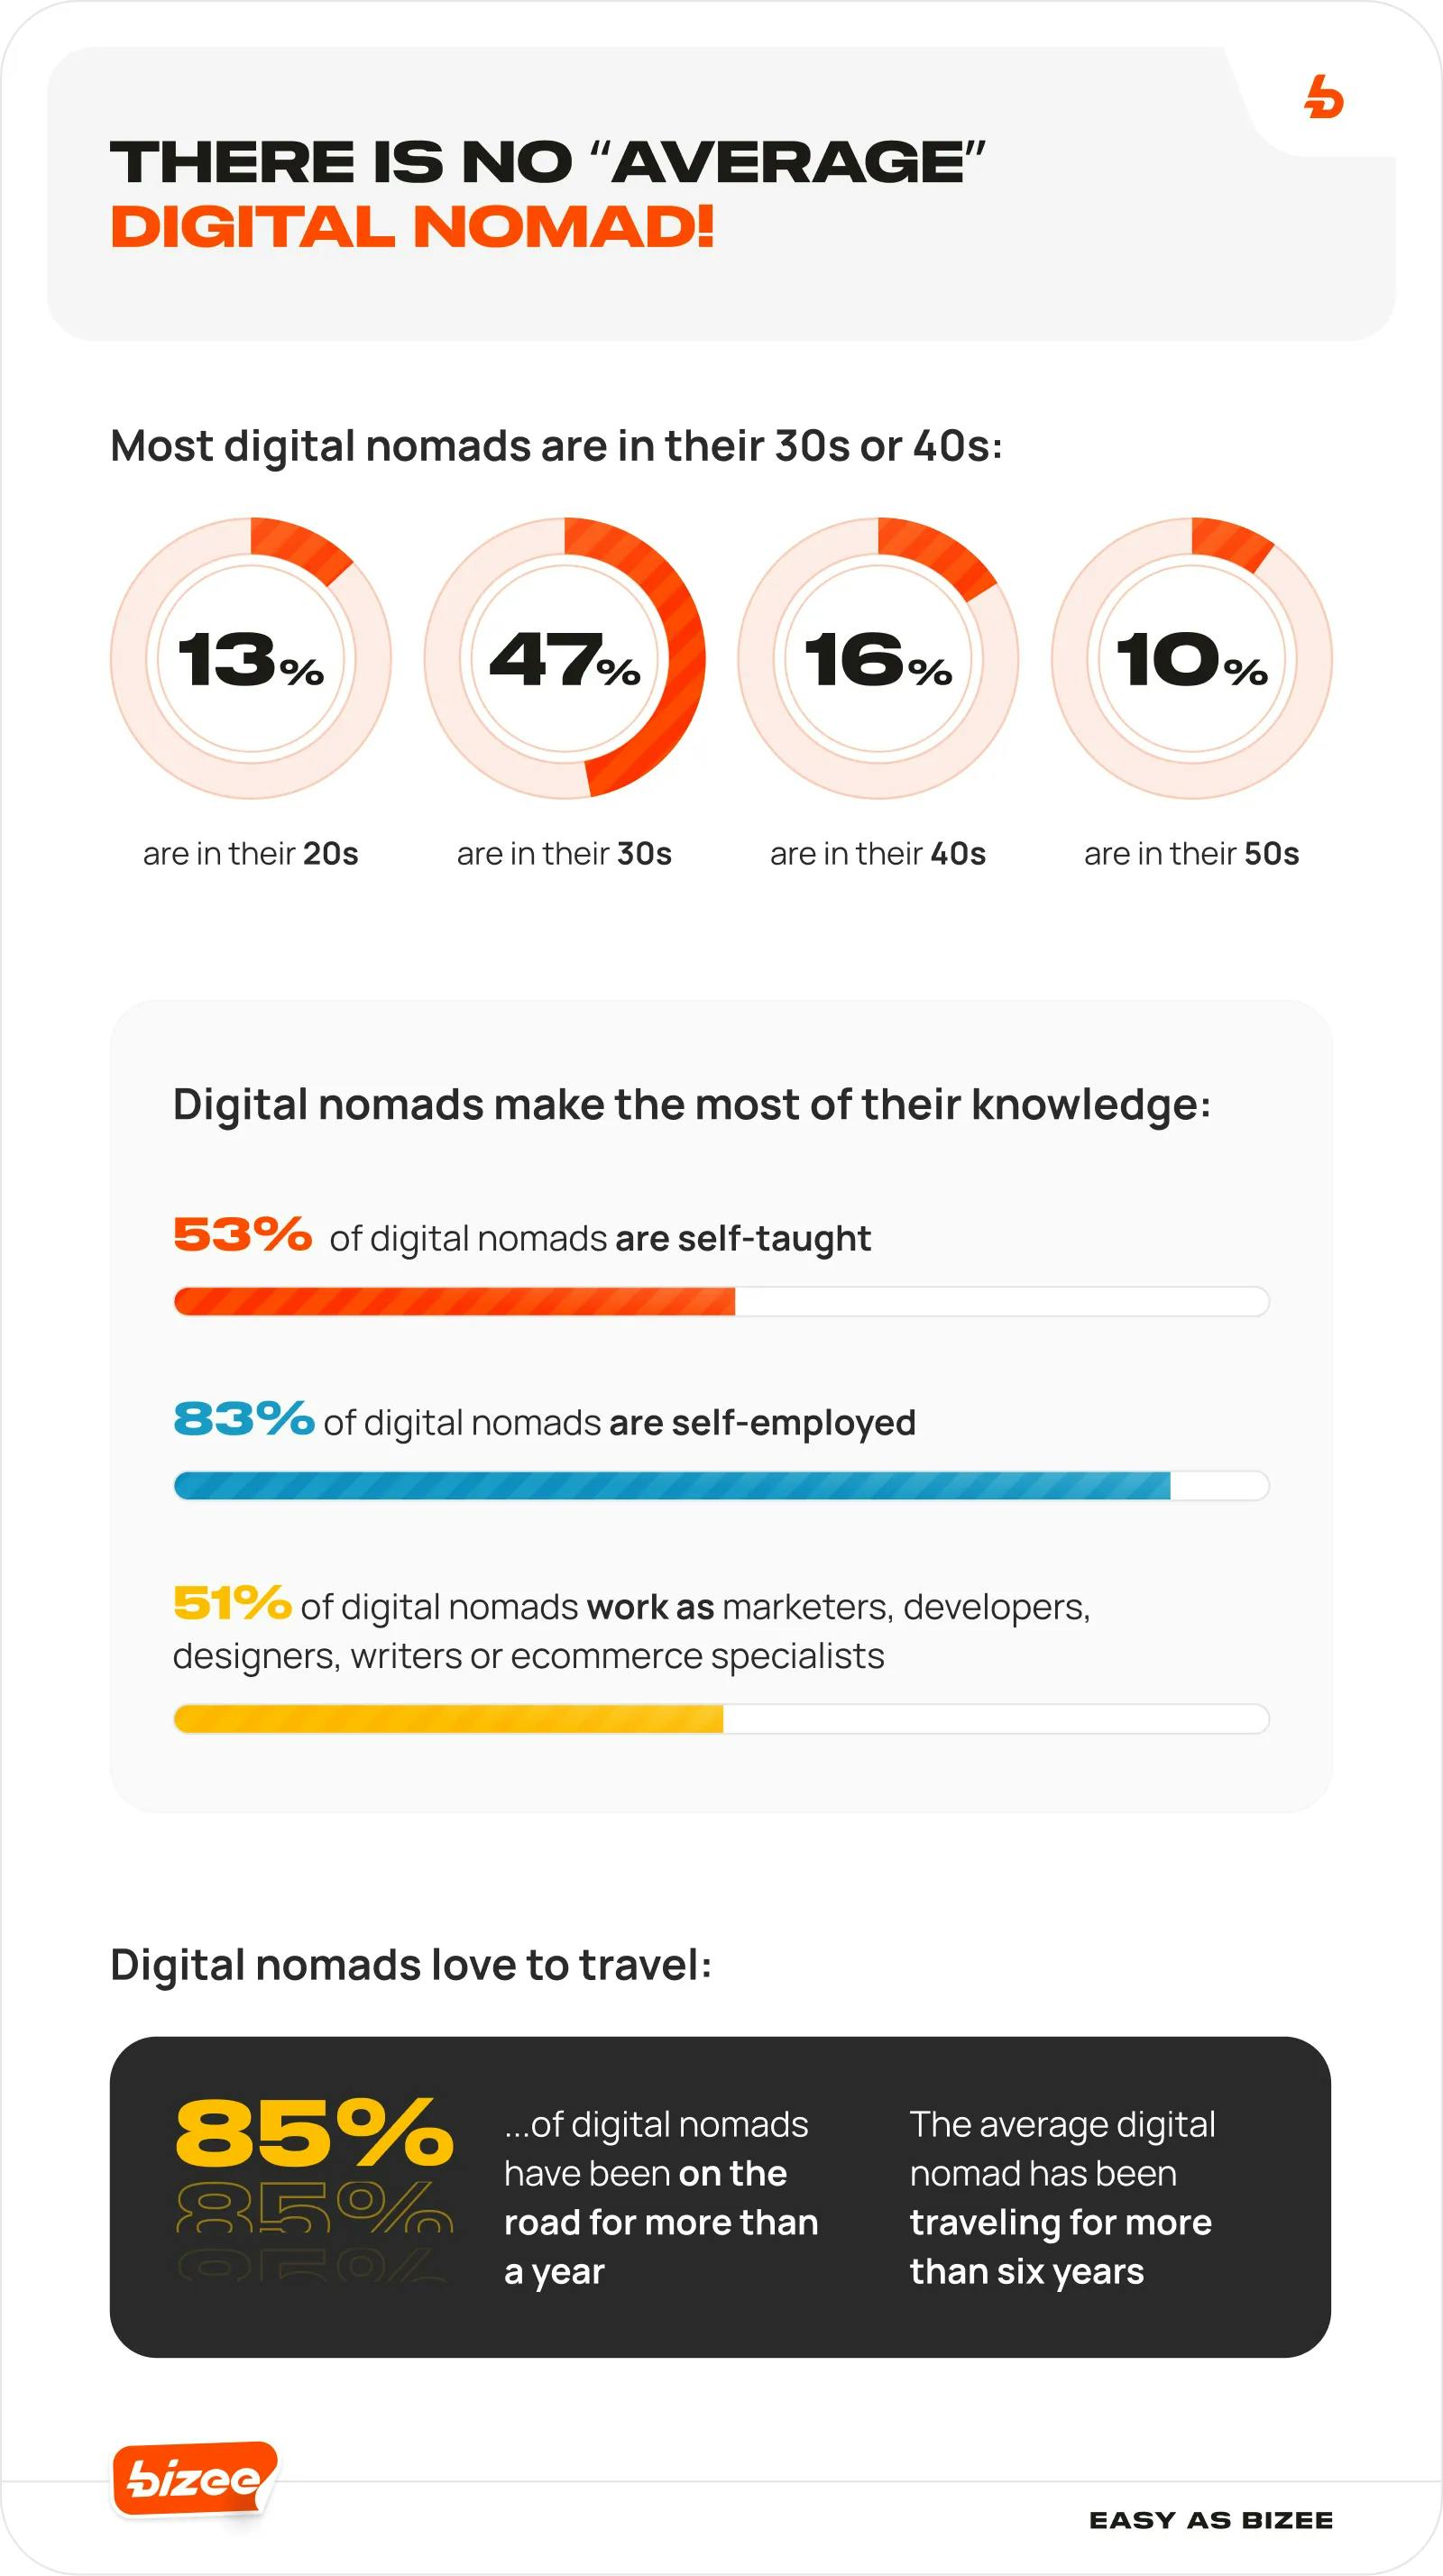 There Is No “Average” Digital Nomad!